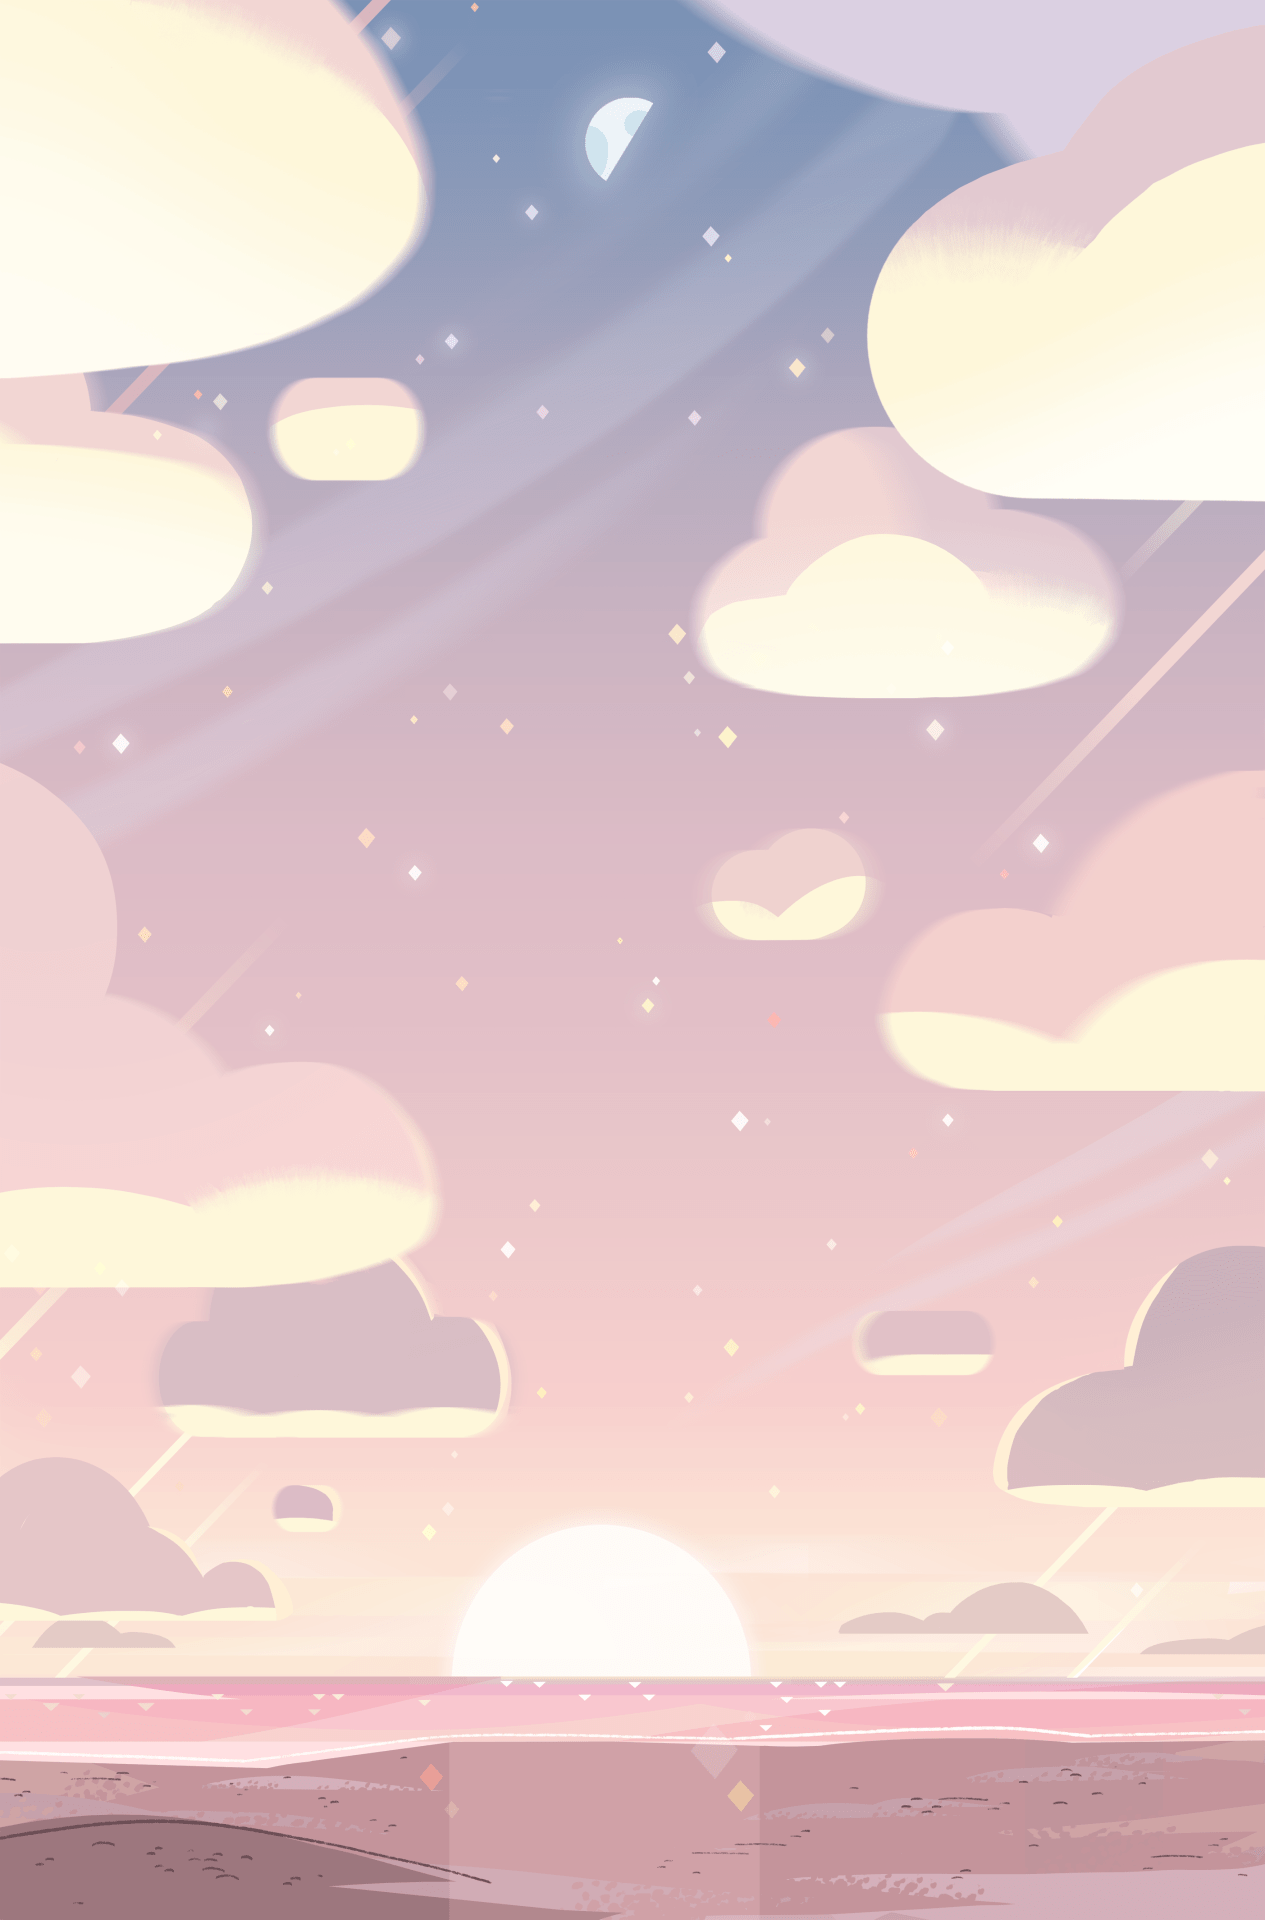 A sunset with clouds and water in the background - 90s anime, iPad, Steven Universe, cute, pink phone, pretty, anime sunset, illustration